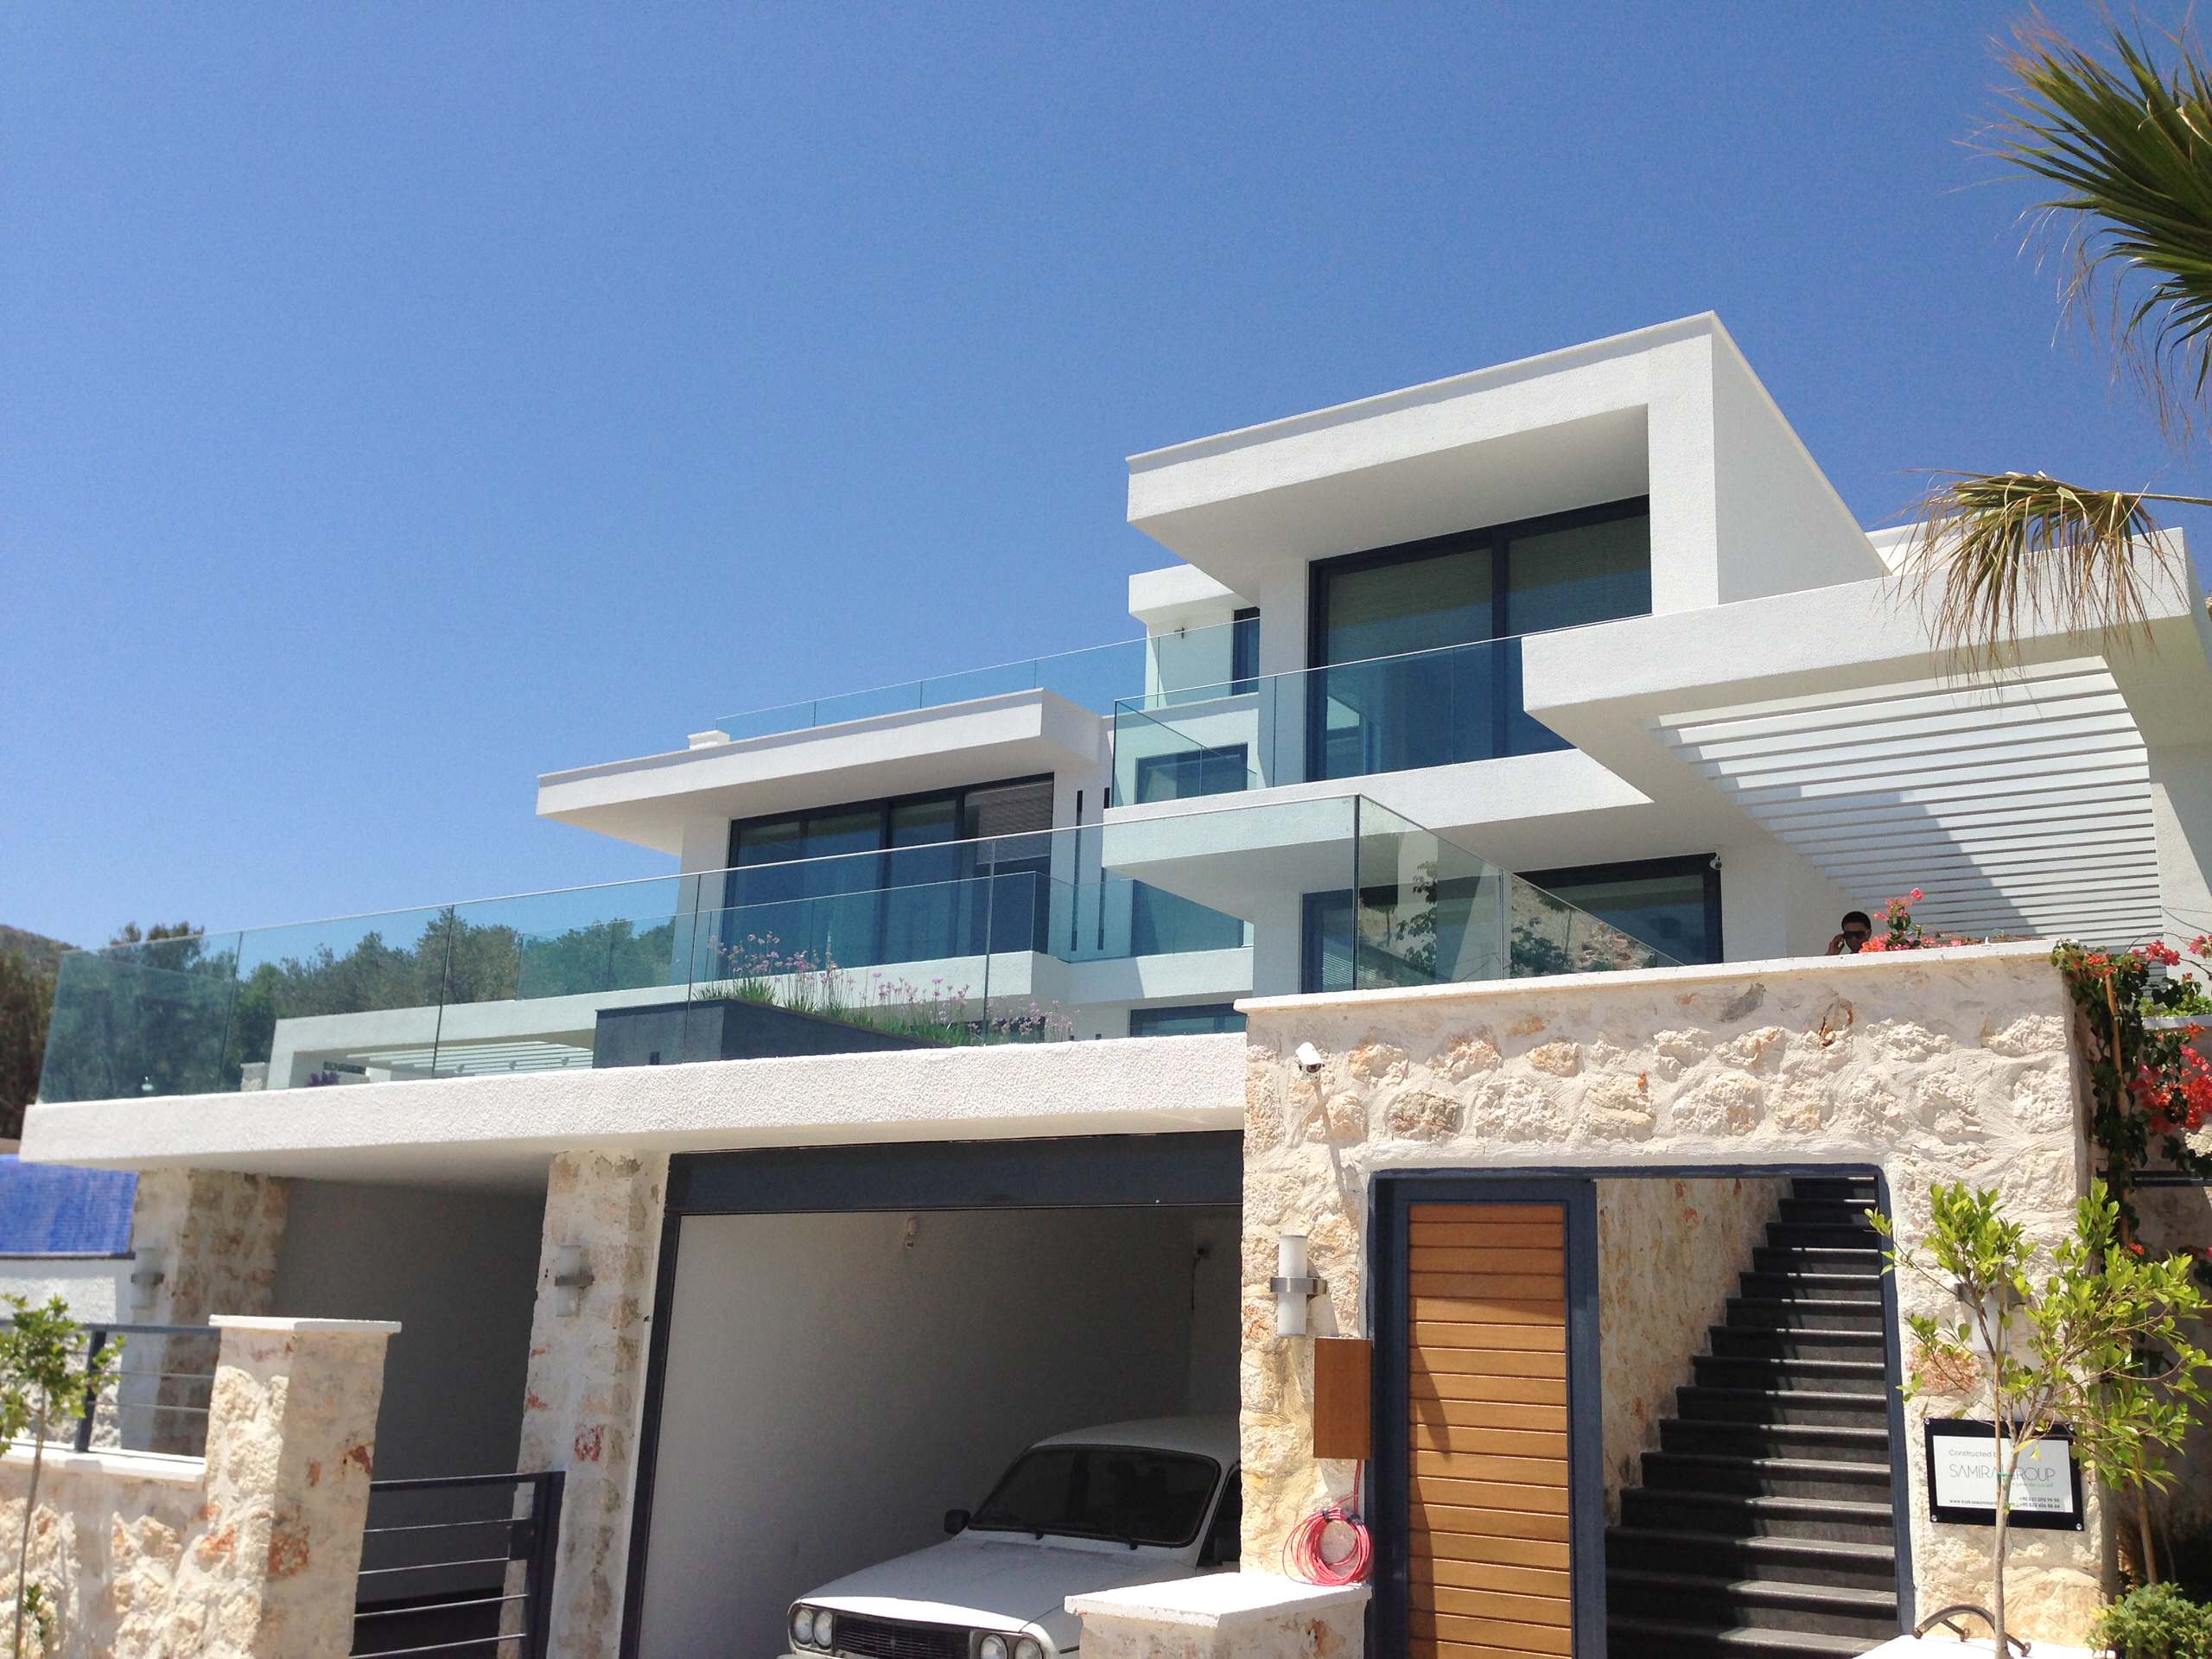 Before Designing Your Modern Turkish Homes, Make the Best Home Choice